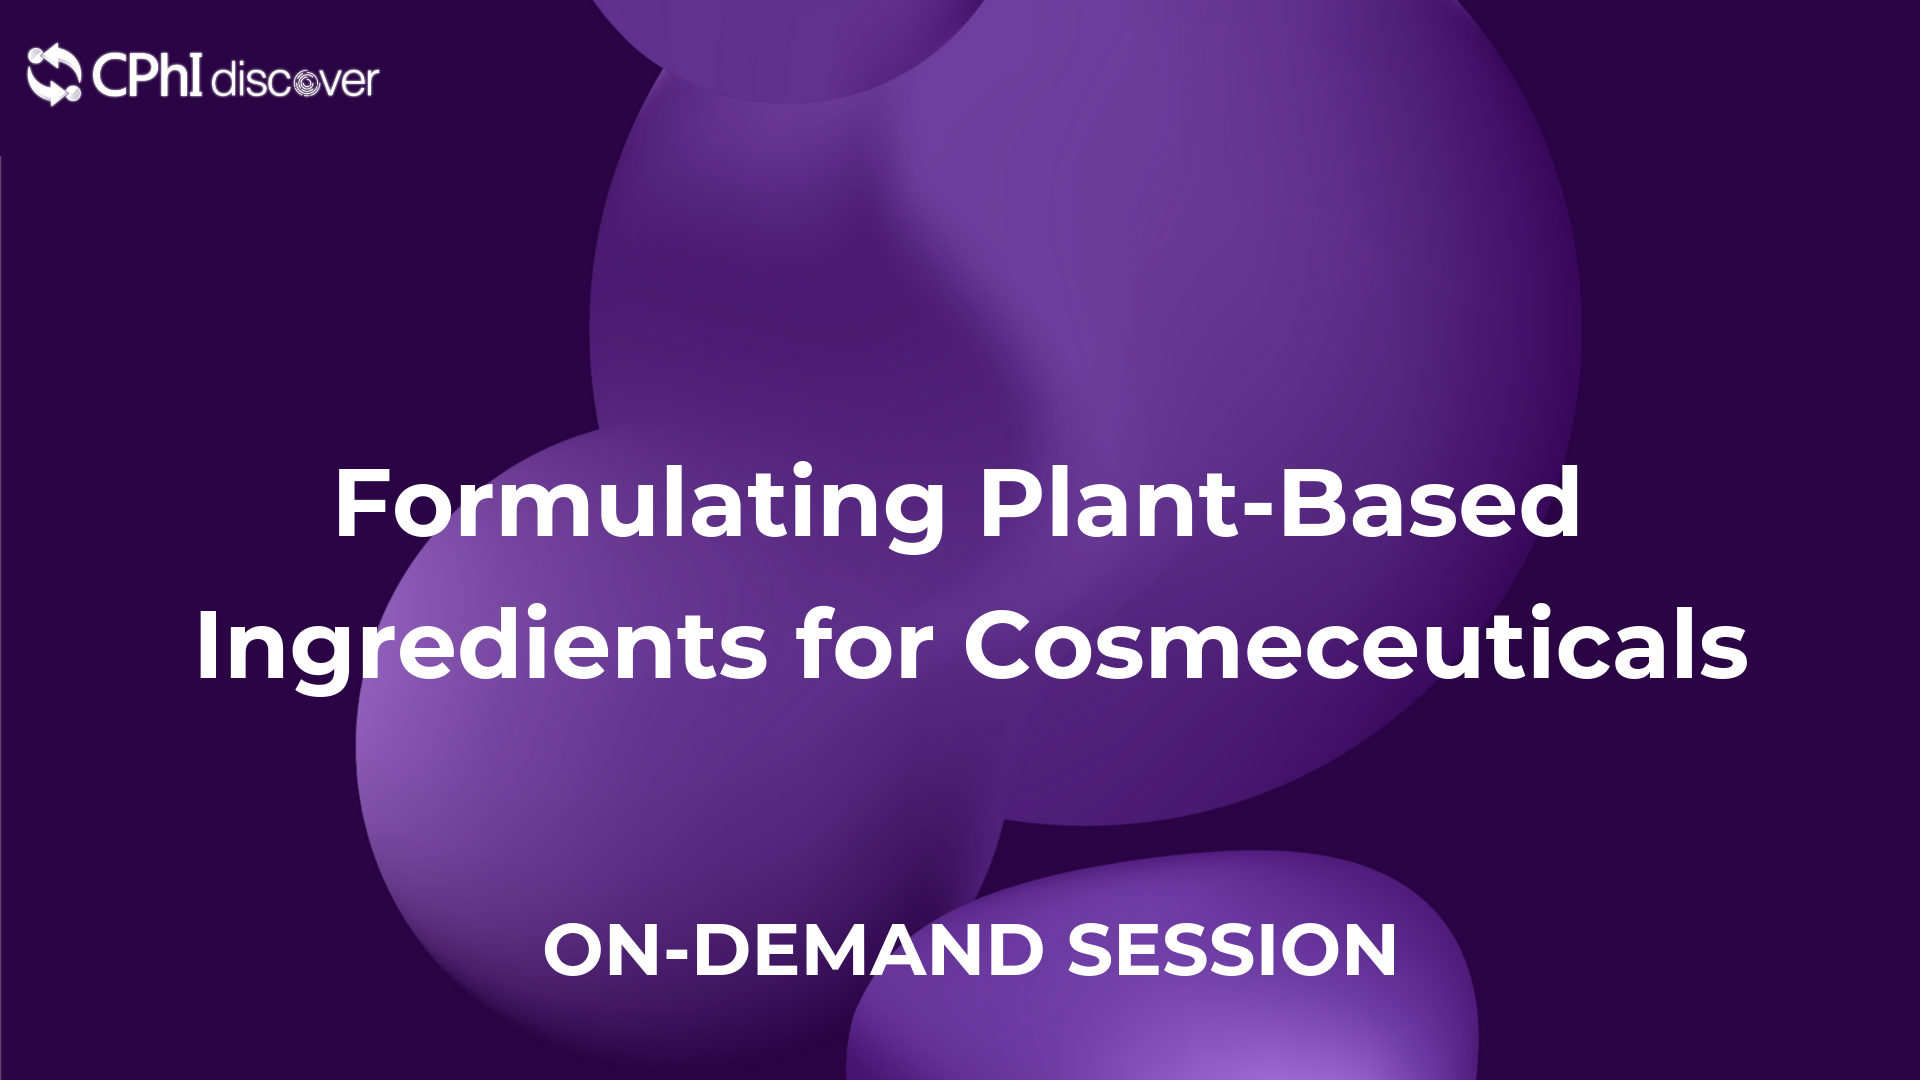 Formulating Plant-Based Ingredients for Cosmeceuticals